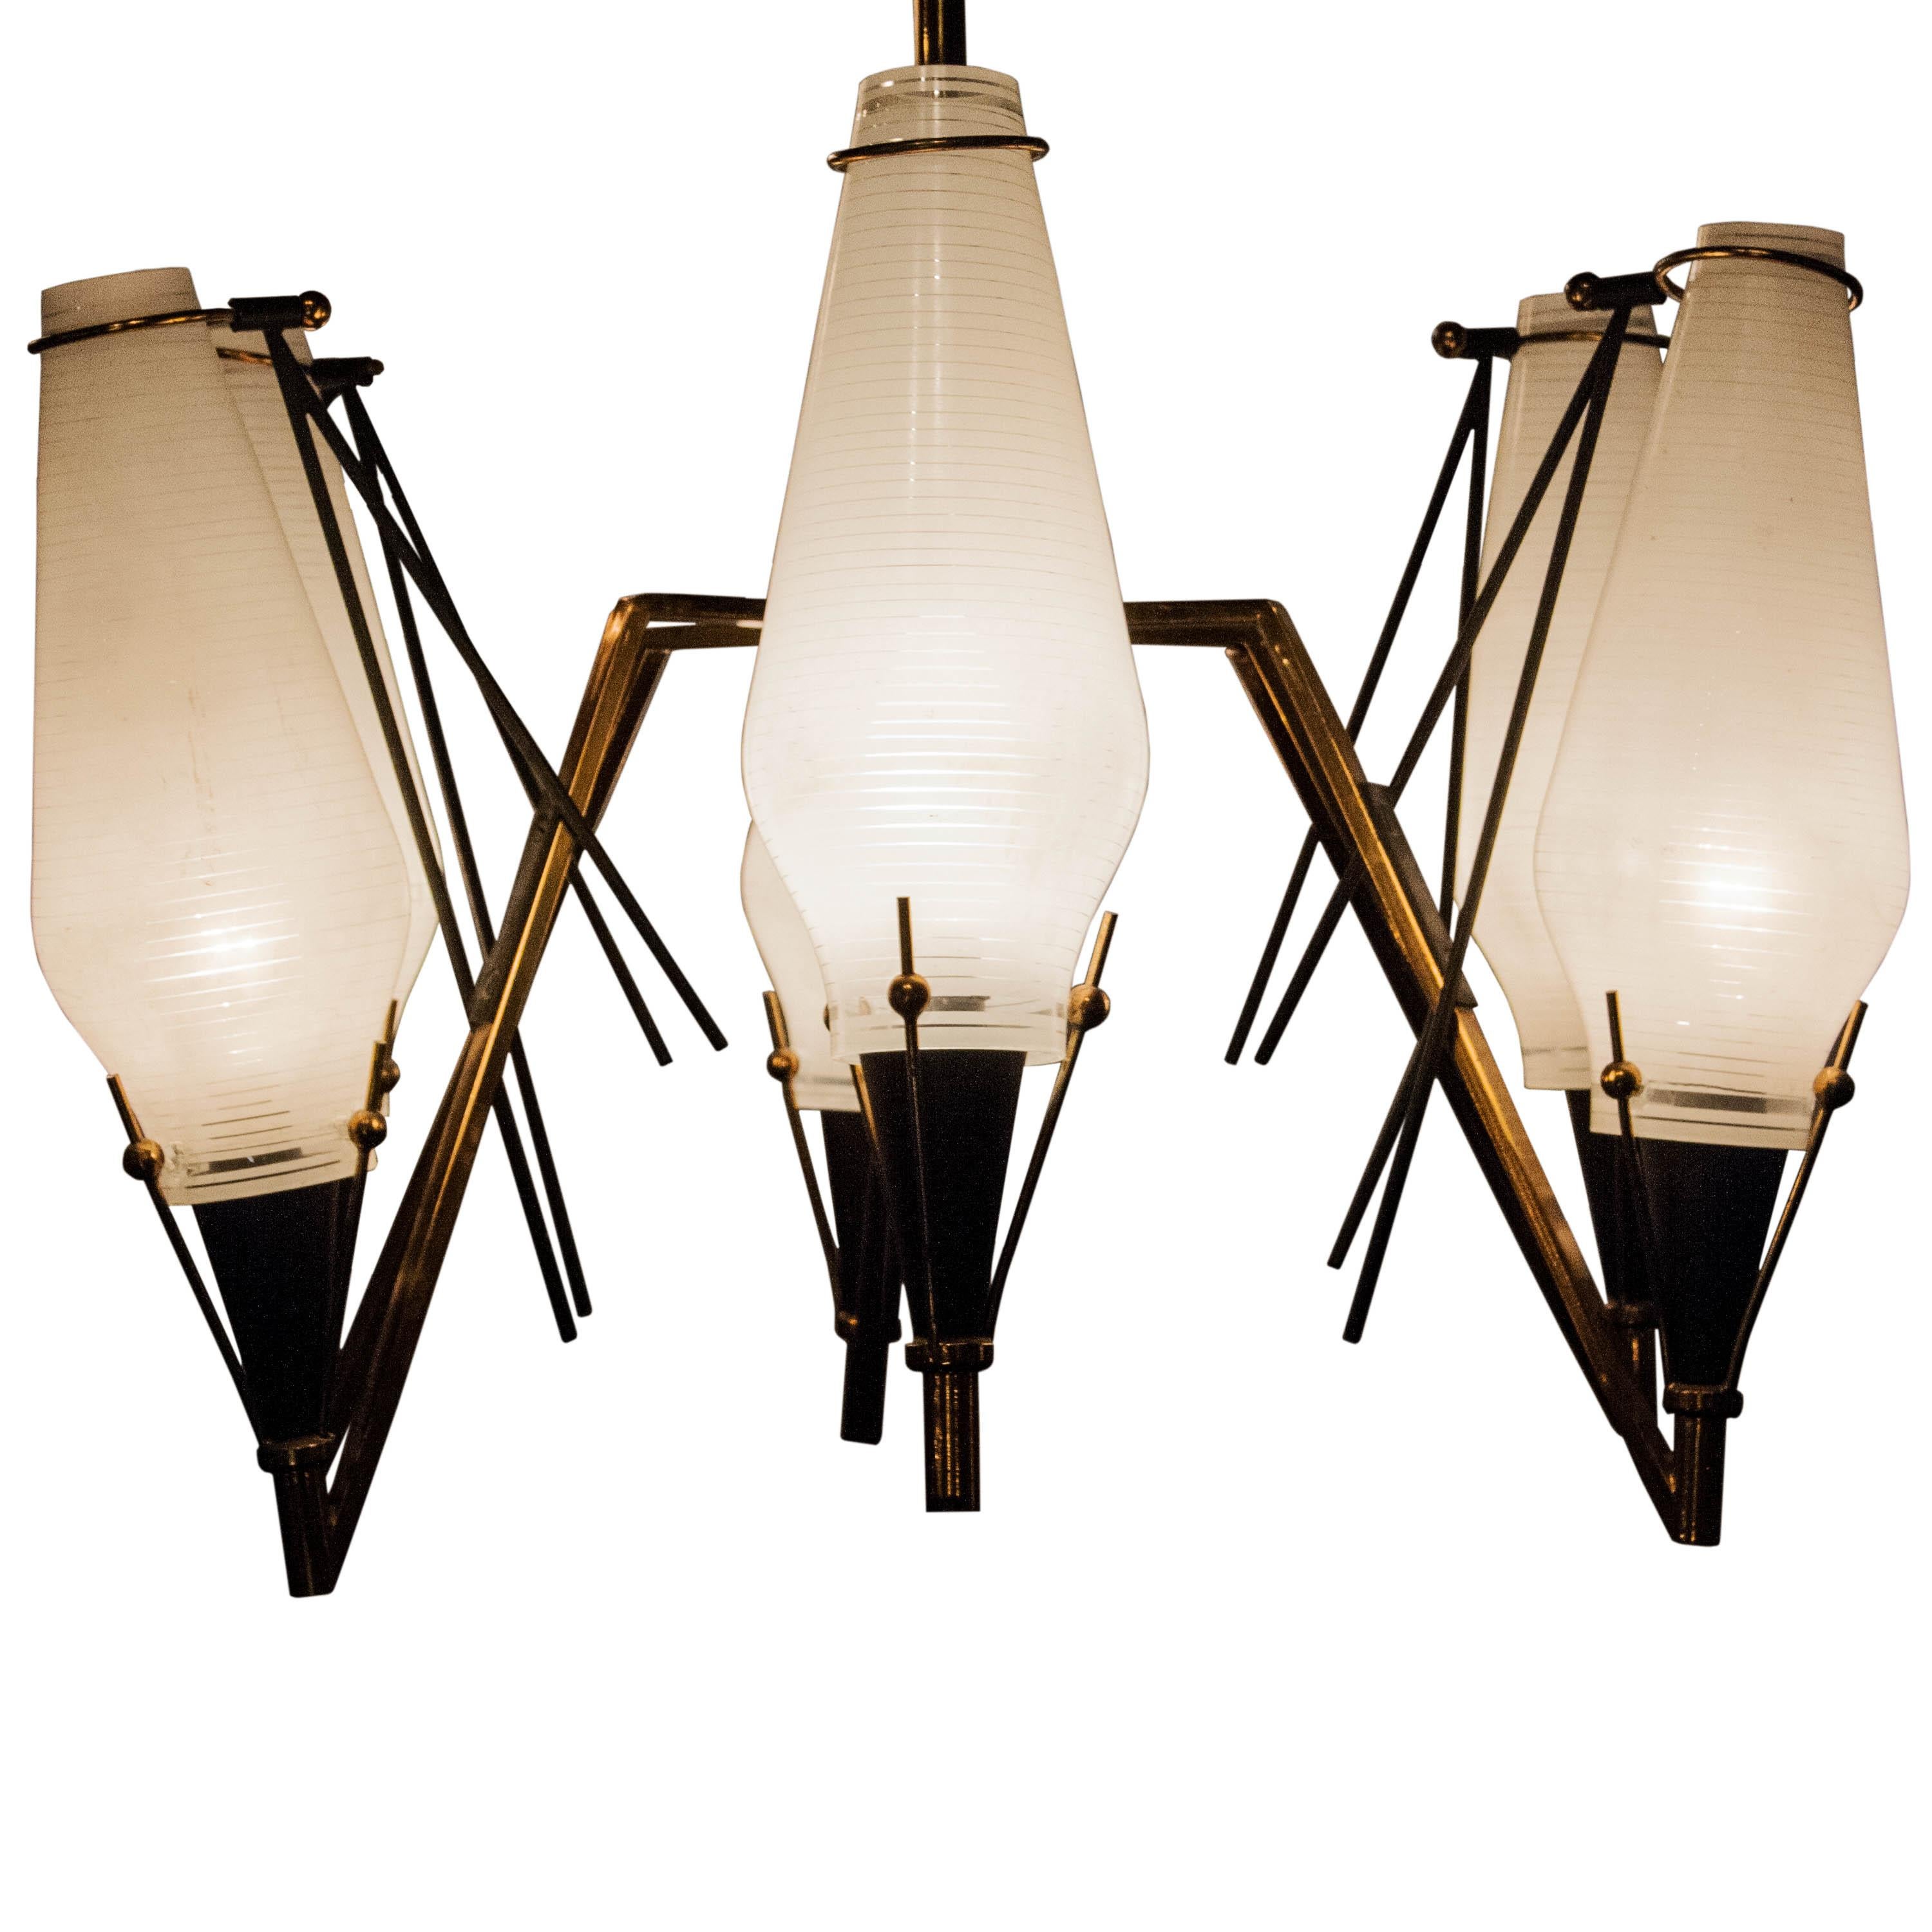 Ceiling lamp brass structure with eight points of light. Glass tulips molded by hand.